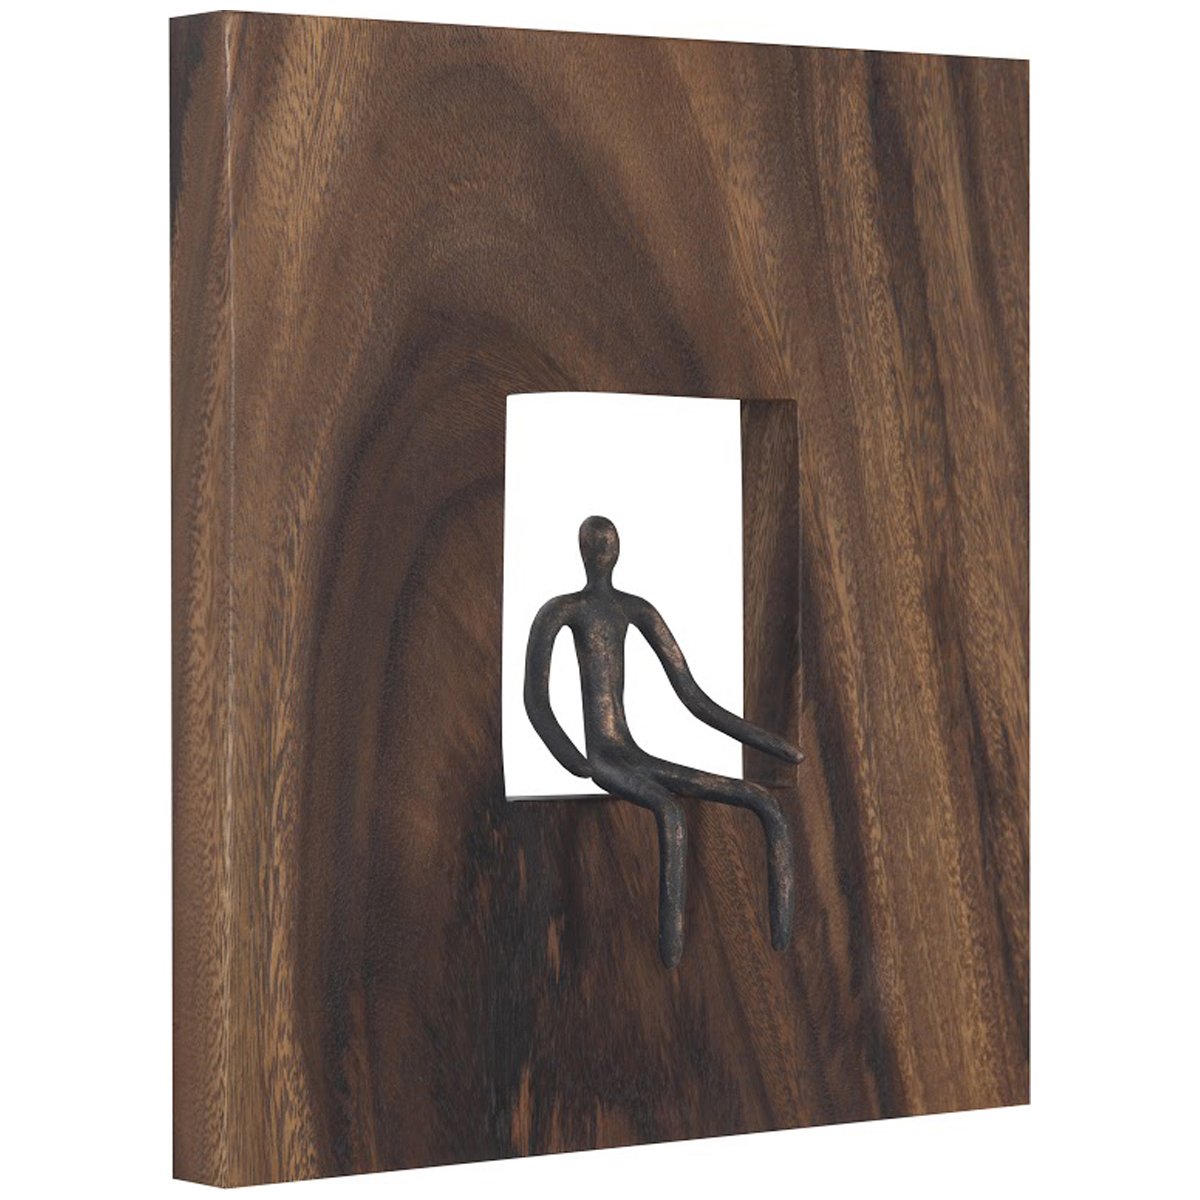 Phillips Collection Atlas Sitting Figure Square Wall Decor